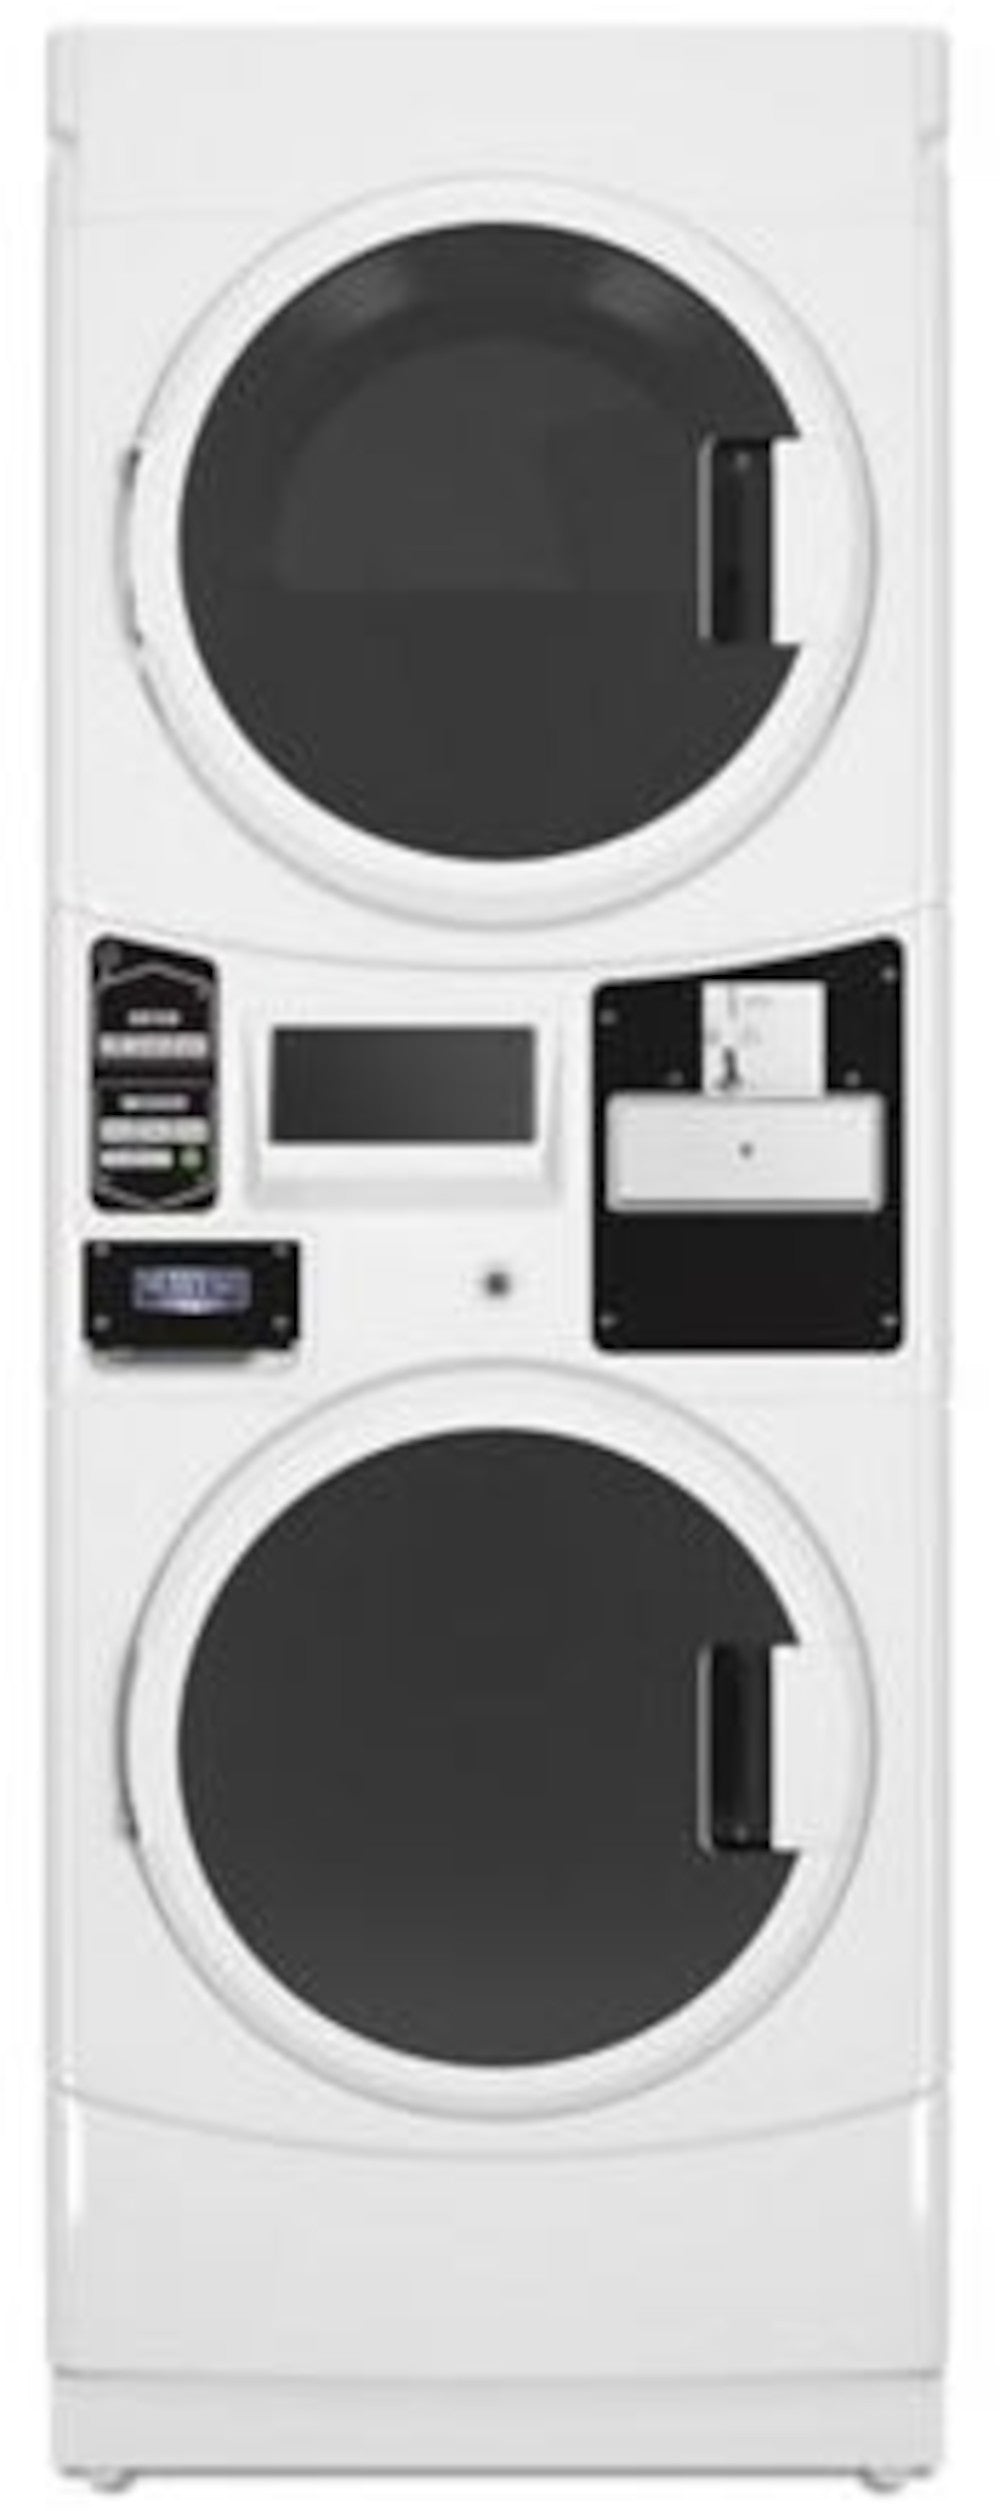 What is the Best Washer and Dryer for Pet Hair?, East Coast Appliance